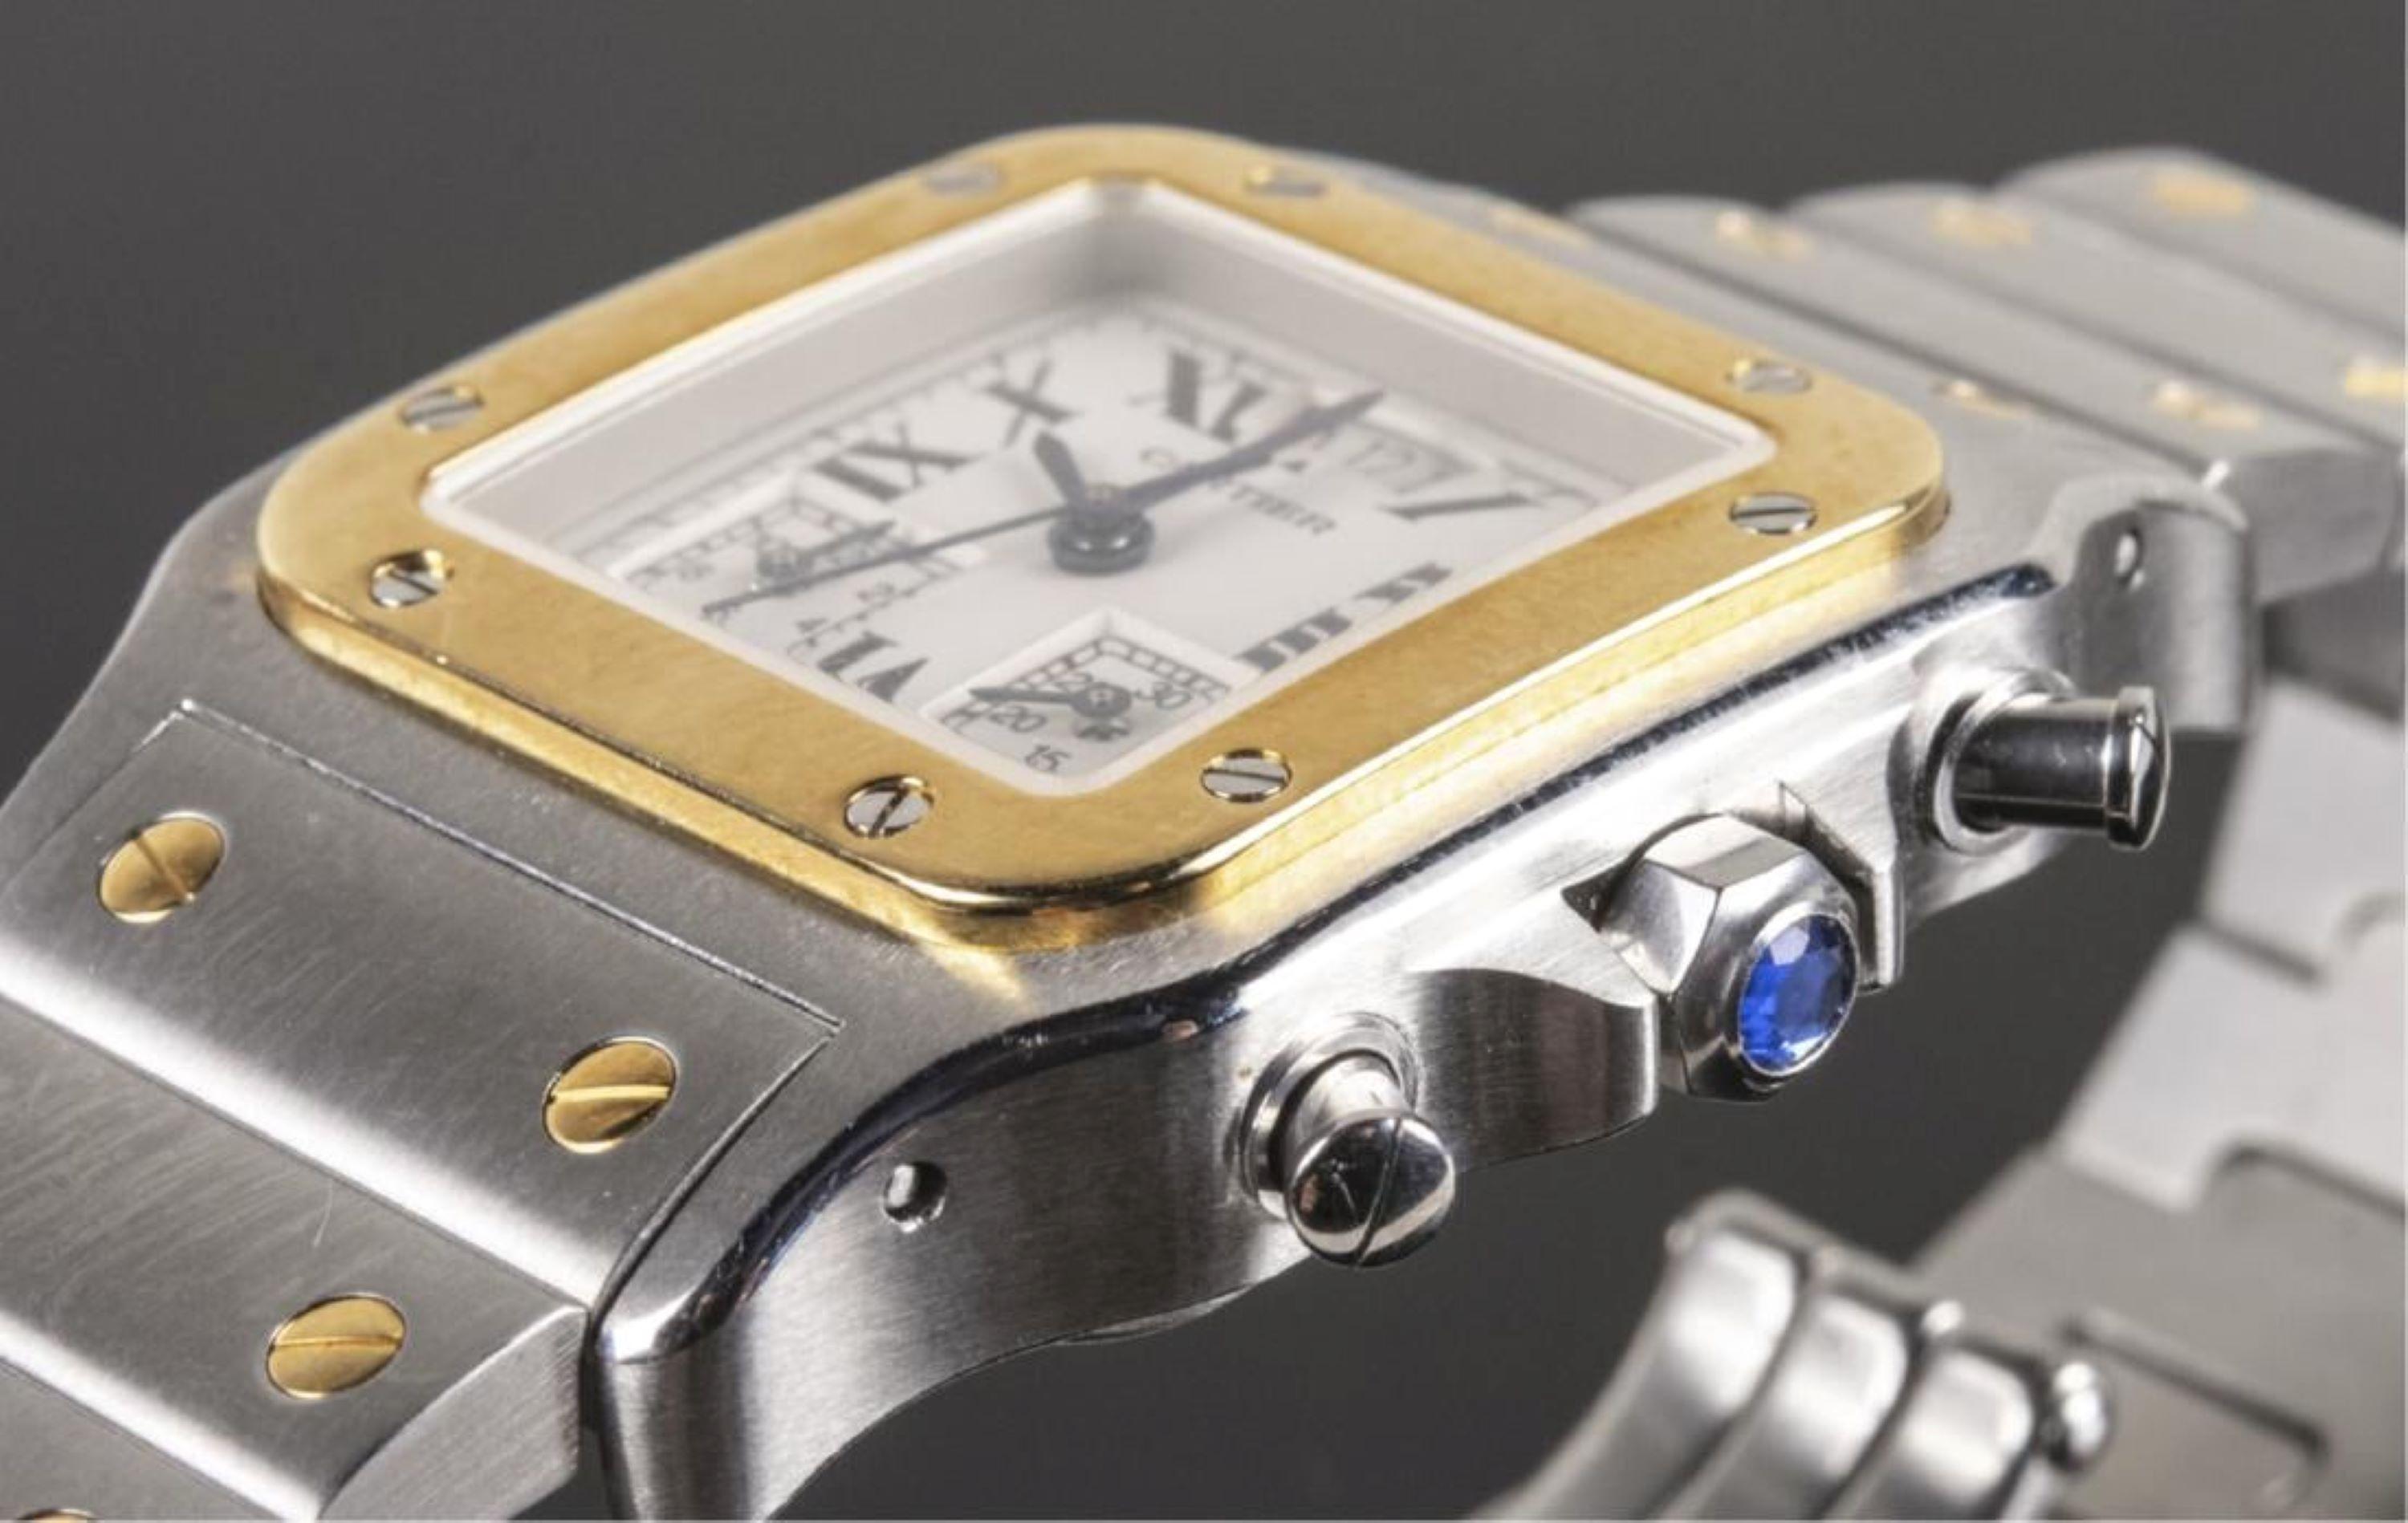 #102744BB 2425, Cal 222, 28 jewels, white dial with Roman numerals, sweep seconds hand, two subsidiary dials and date aperture, signed Cartier, stainless steel and 18k yellow gold band. Topaz stone in crown. 
